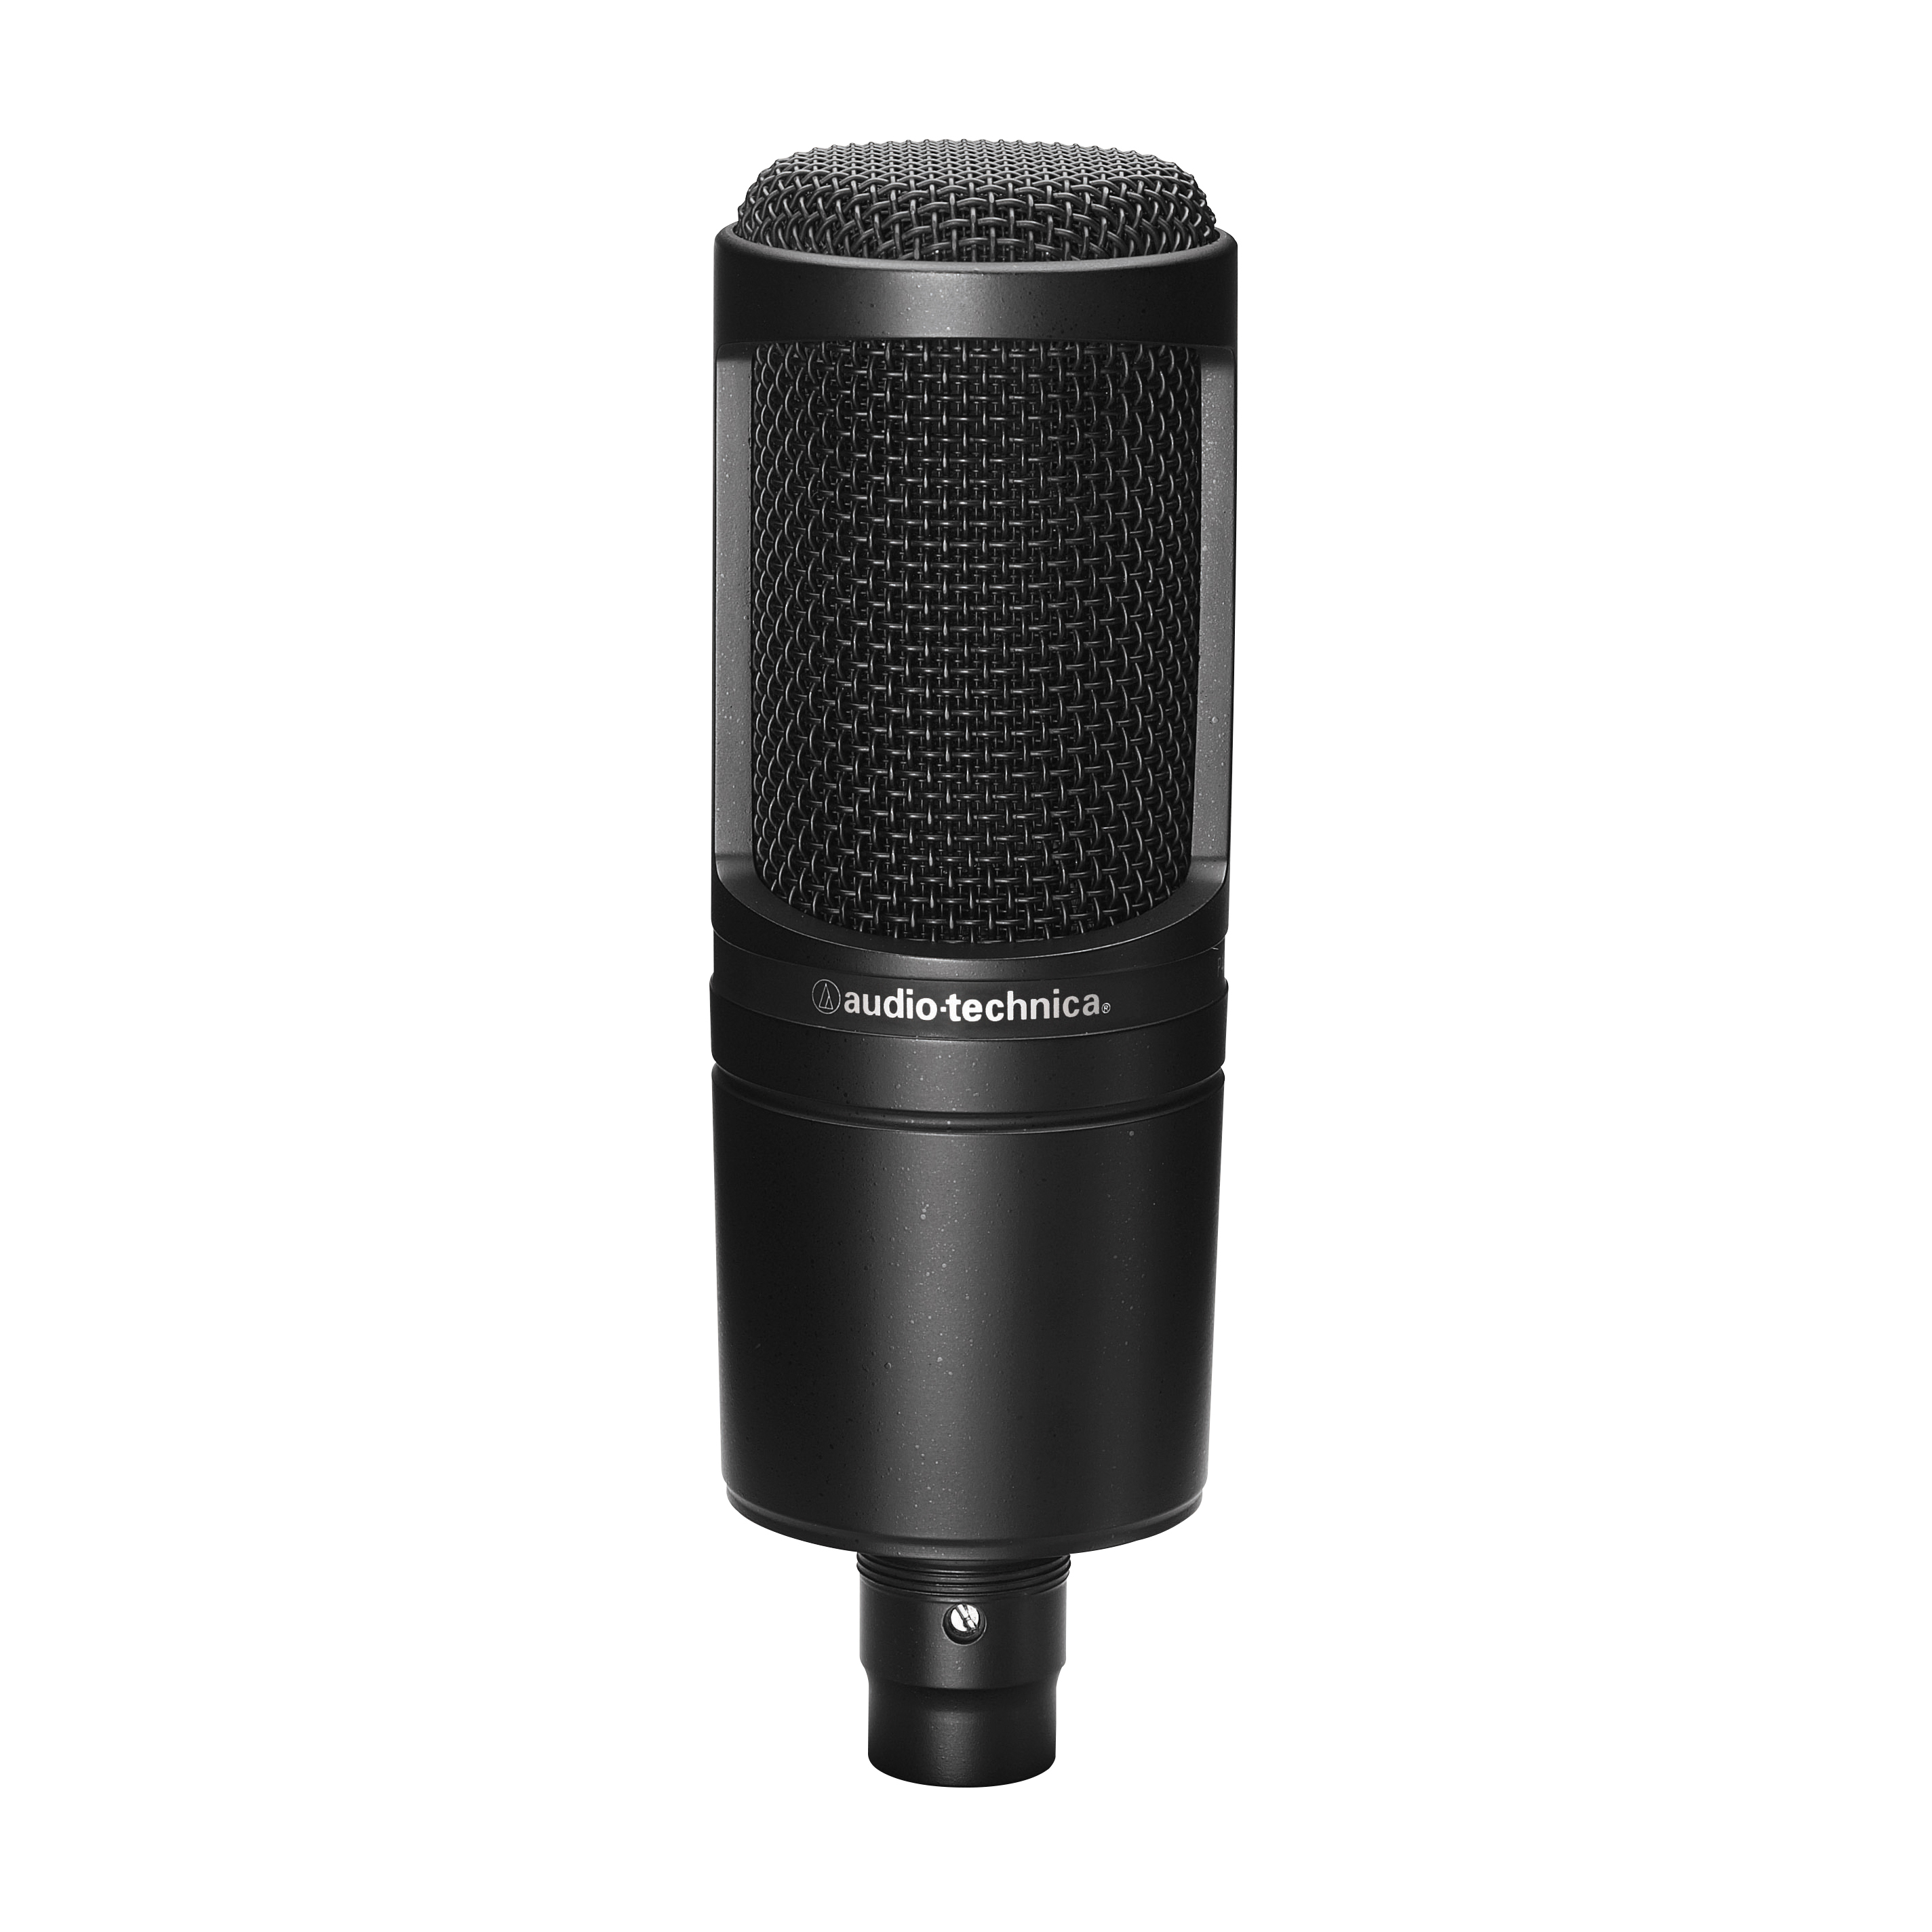 Audio Technica Pack At2020 + Filtre Anti-pop + Câble - Microphone pack with stand - Variation 1